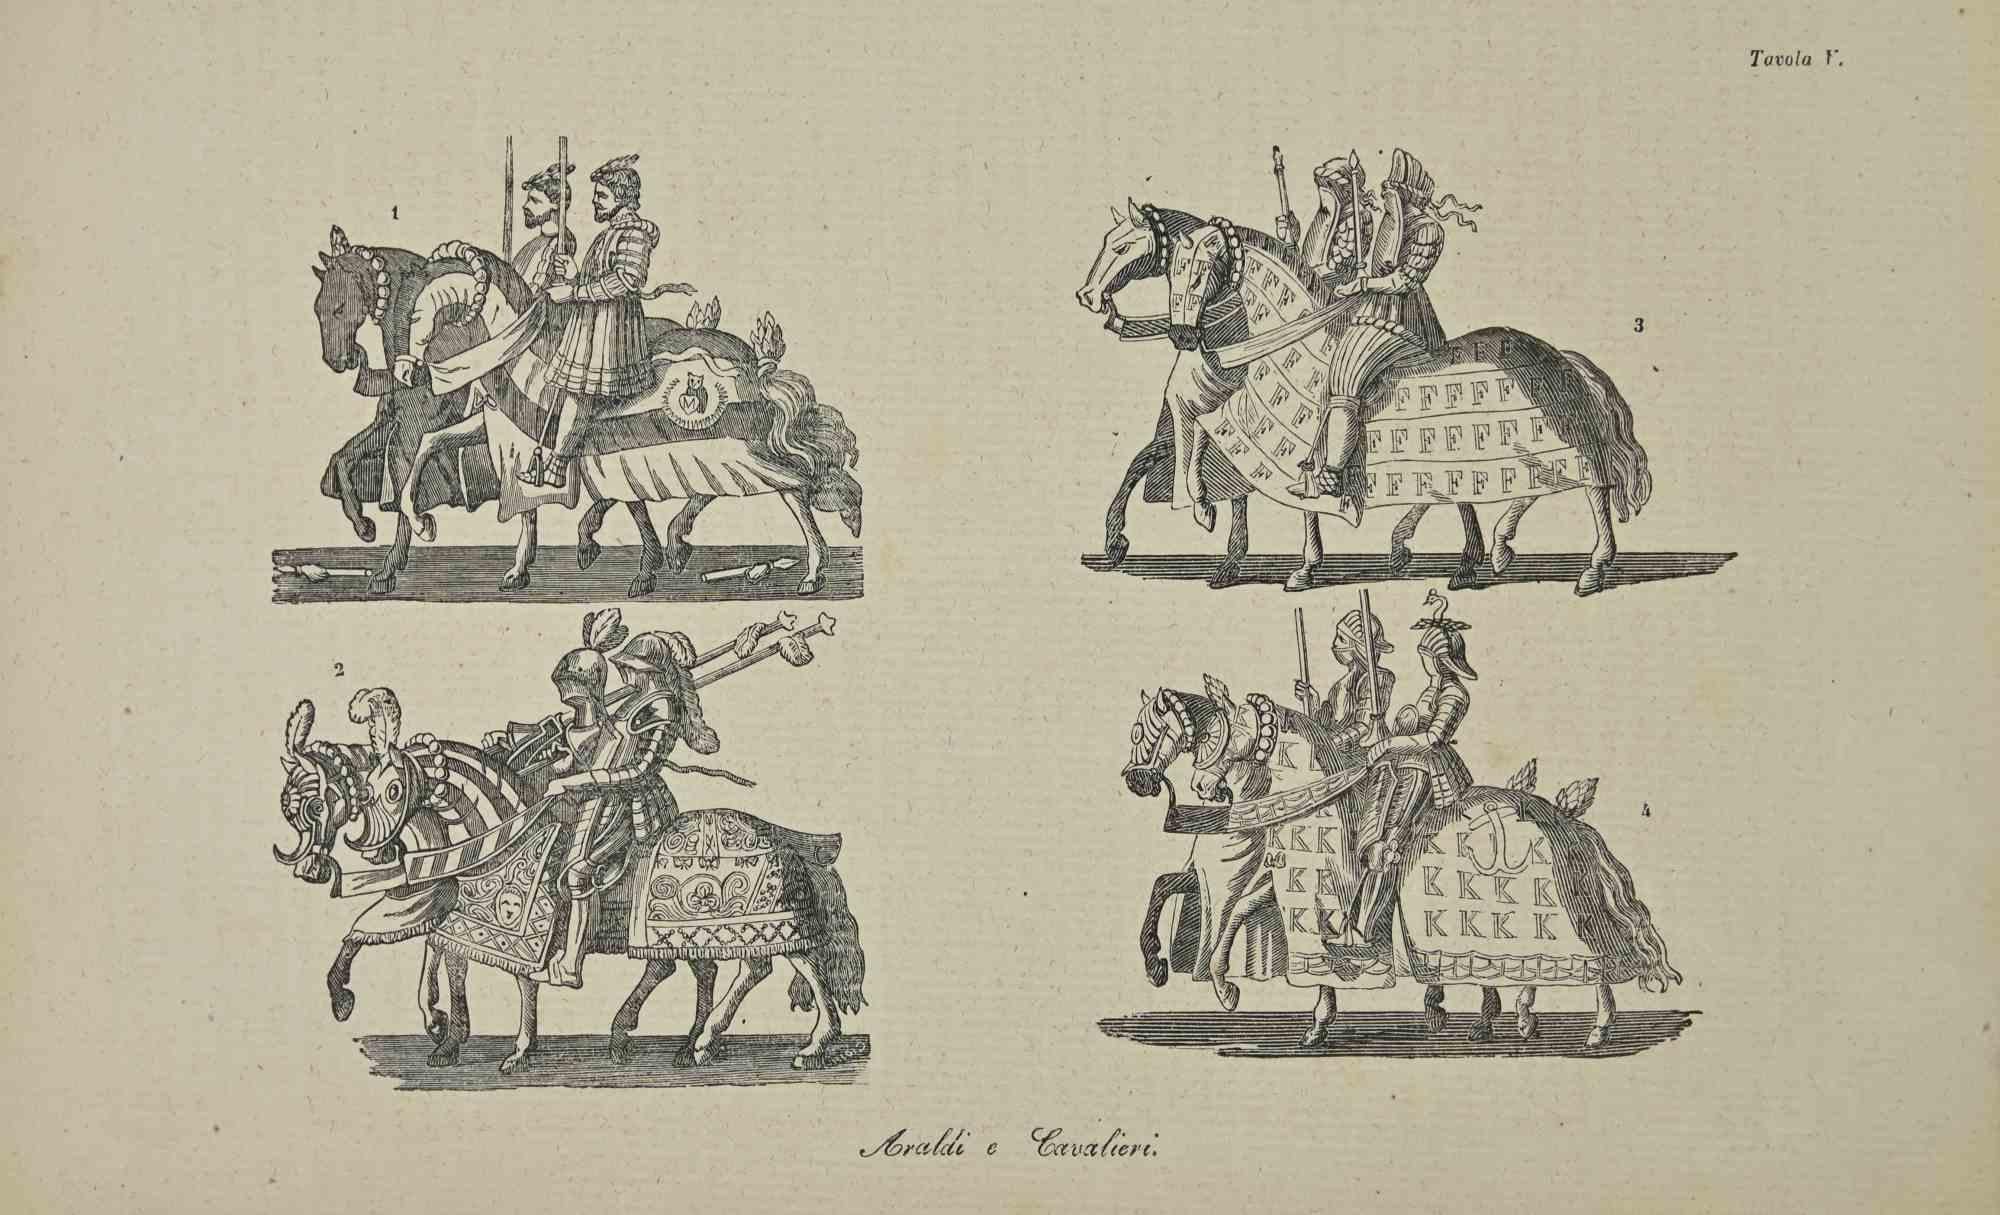 Various Artists Figurative Print - Uses and Customs - Heralds and Knights - Lithograph - 1862